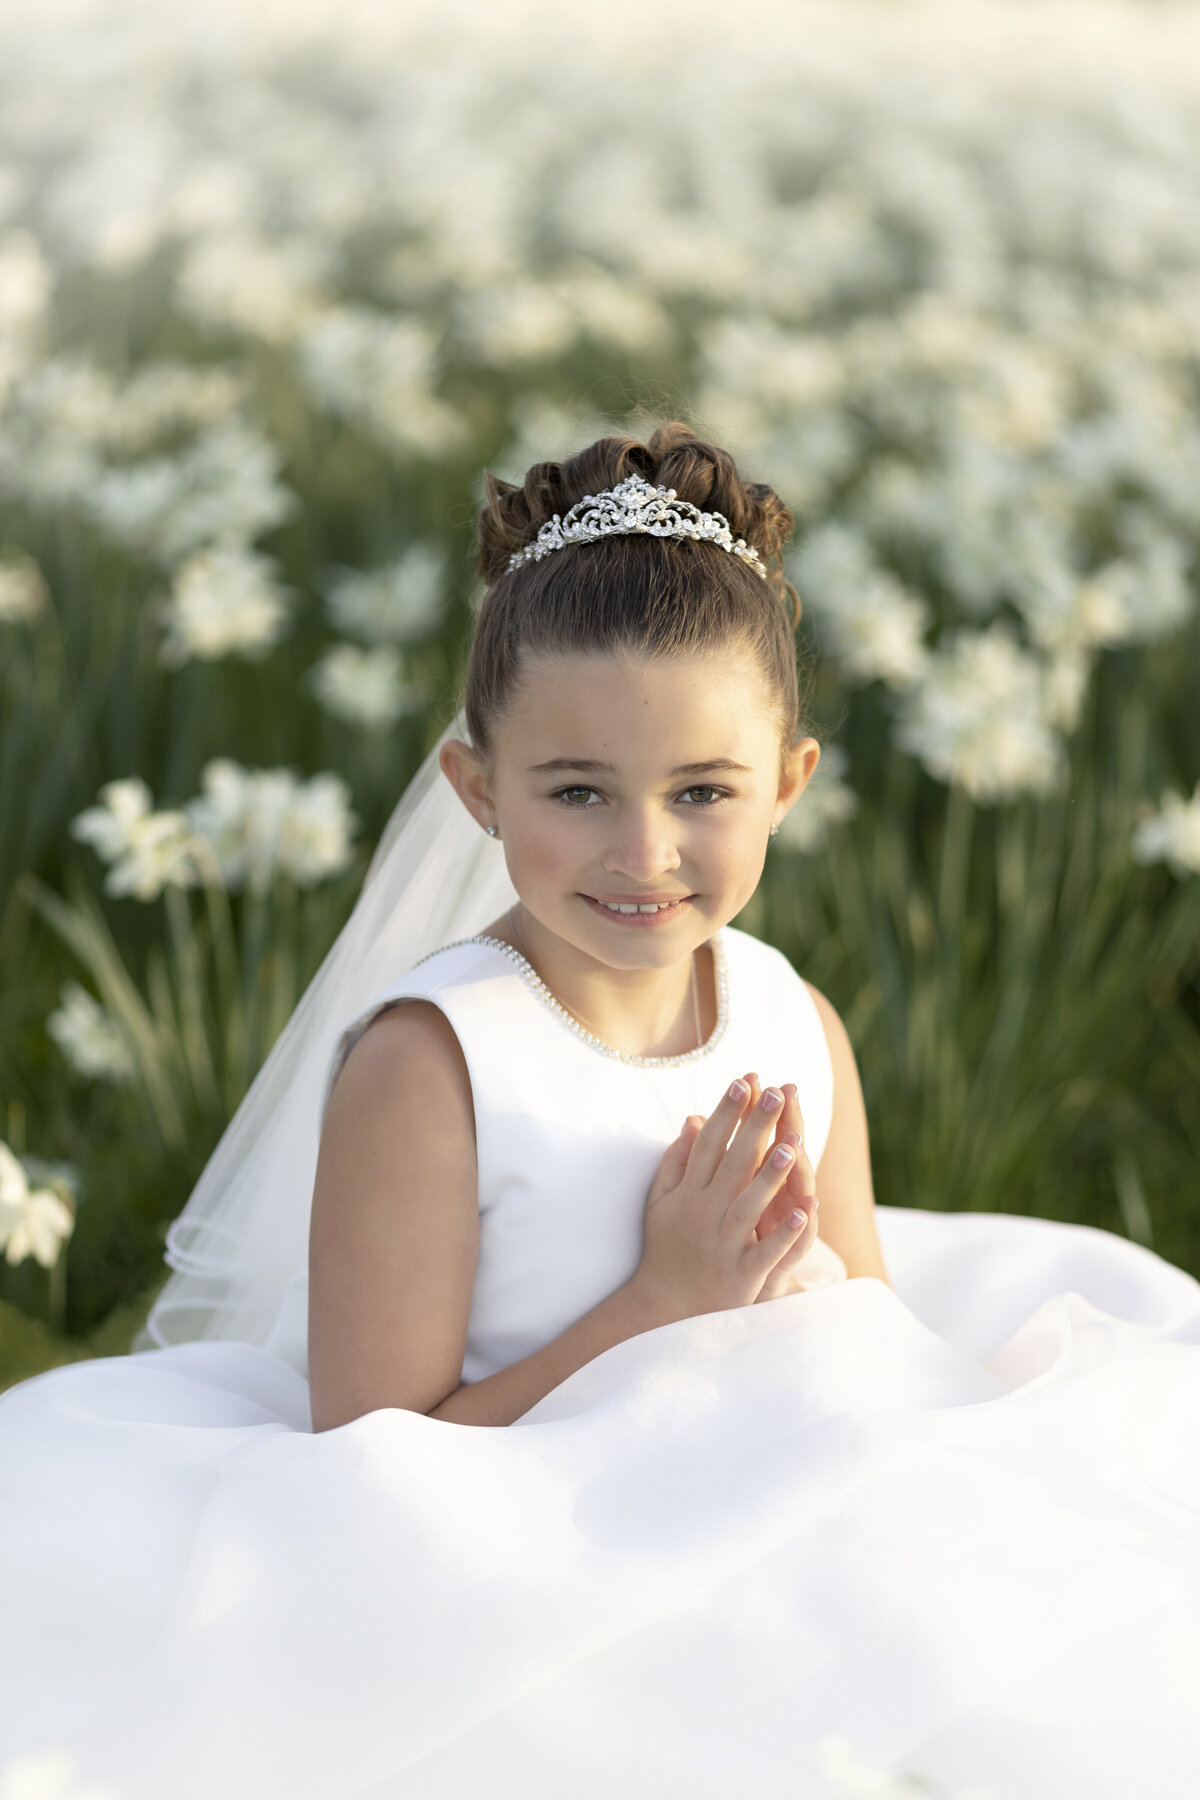 A girl wearing a white dress and tiara sits in a park field of wildflowers